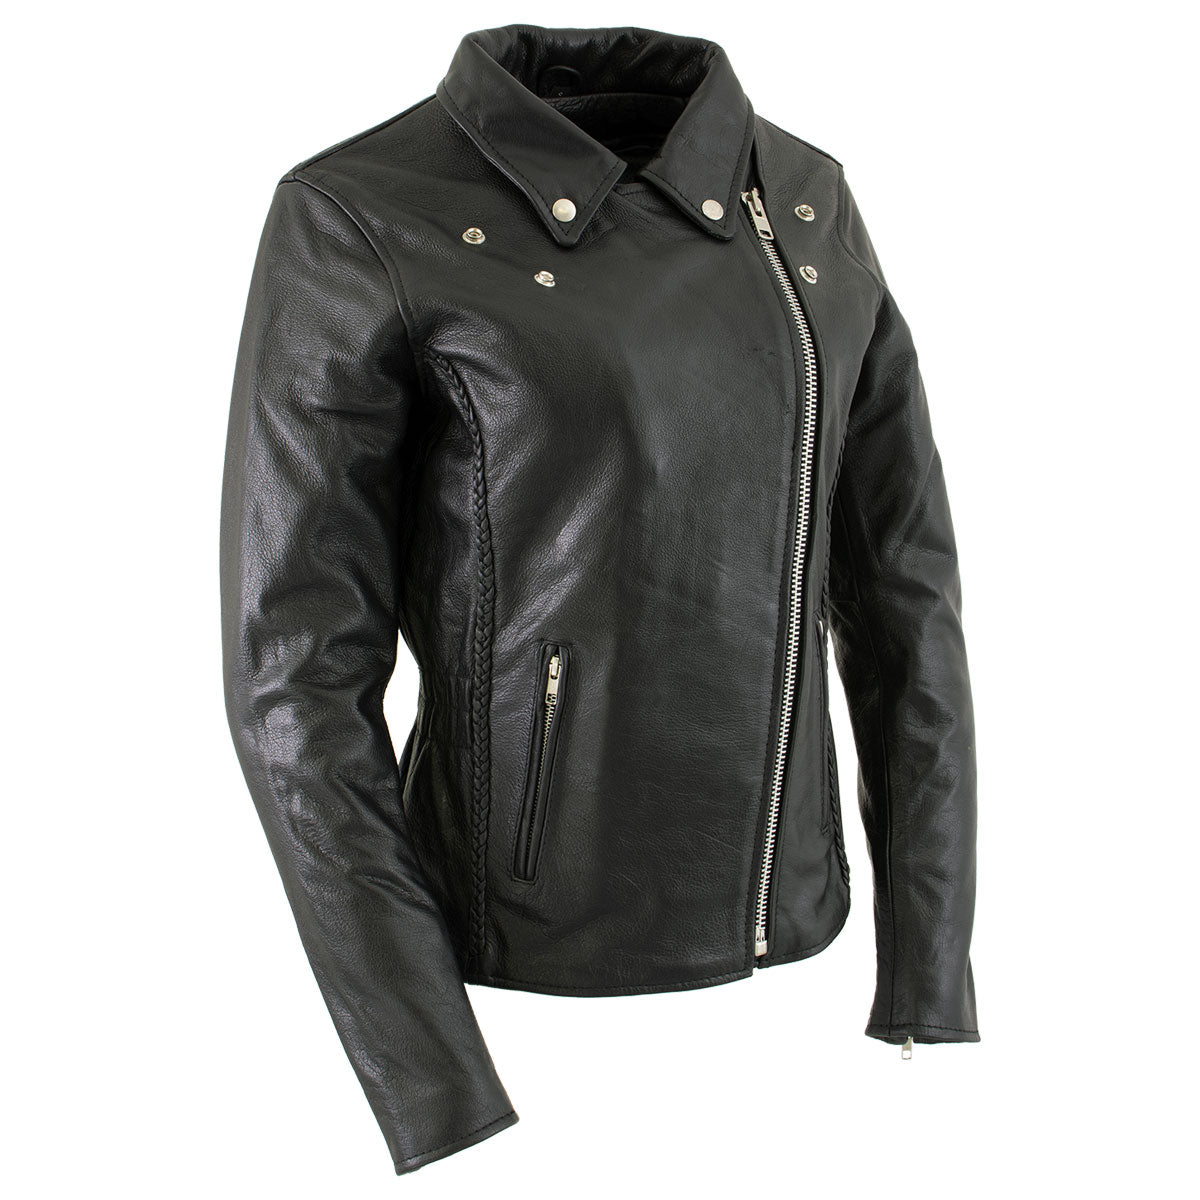 Xelement B8000 'Classic' Women's Black Leather Braided Jacket with Gun